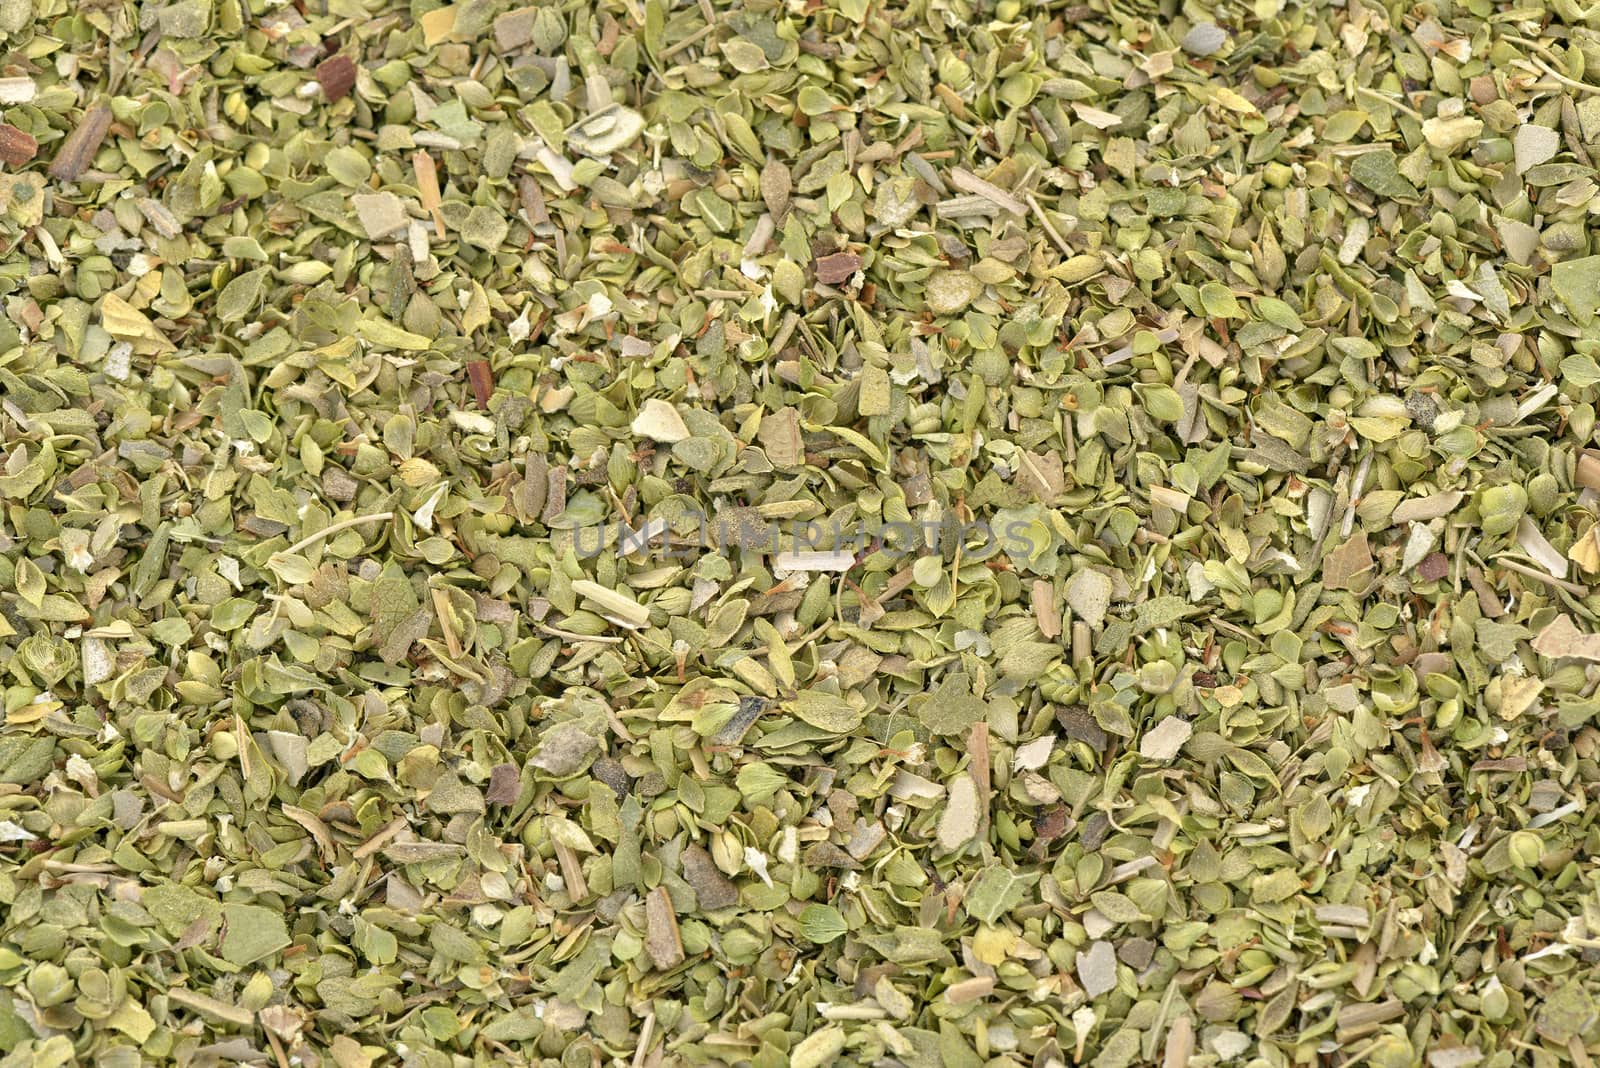 Dried origan spice  to use as background